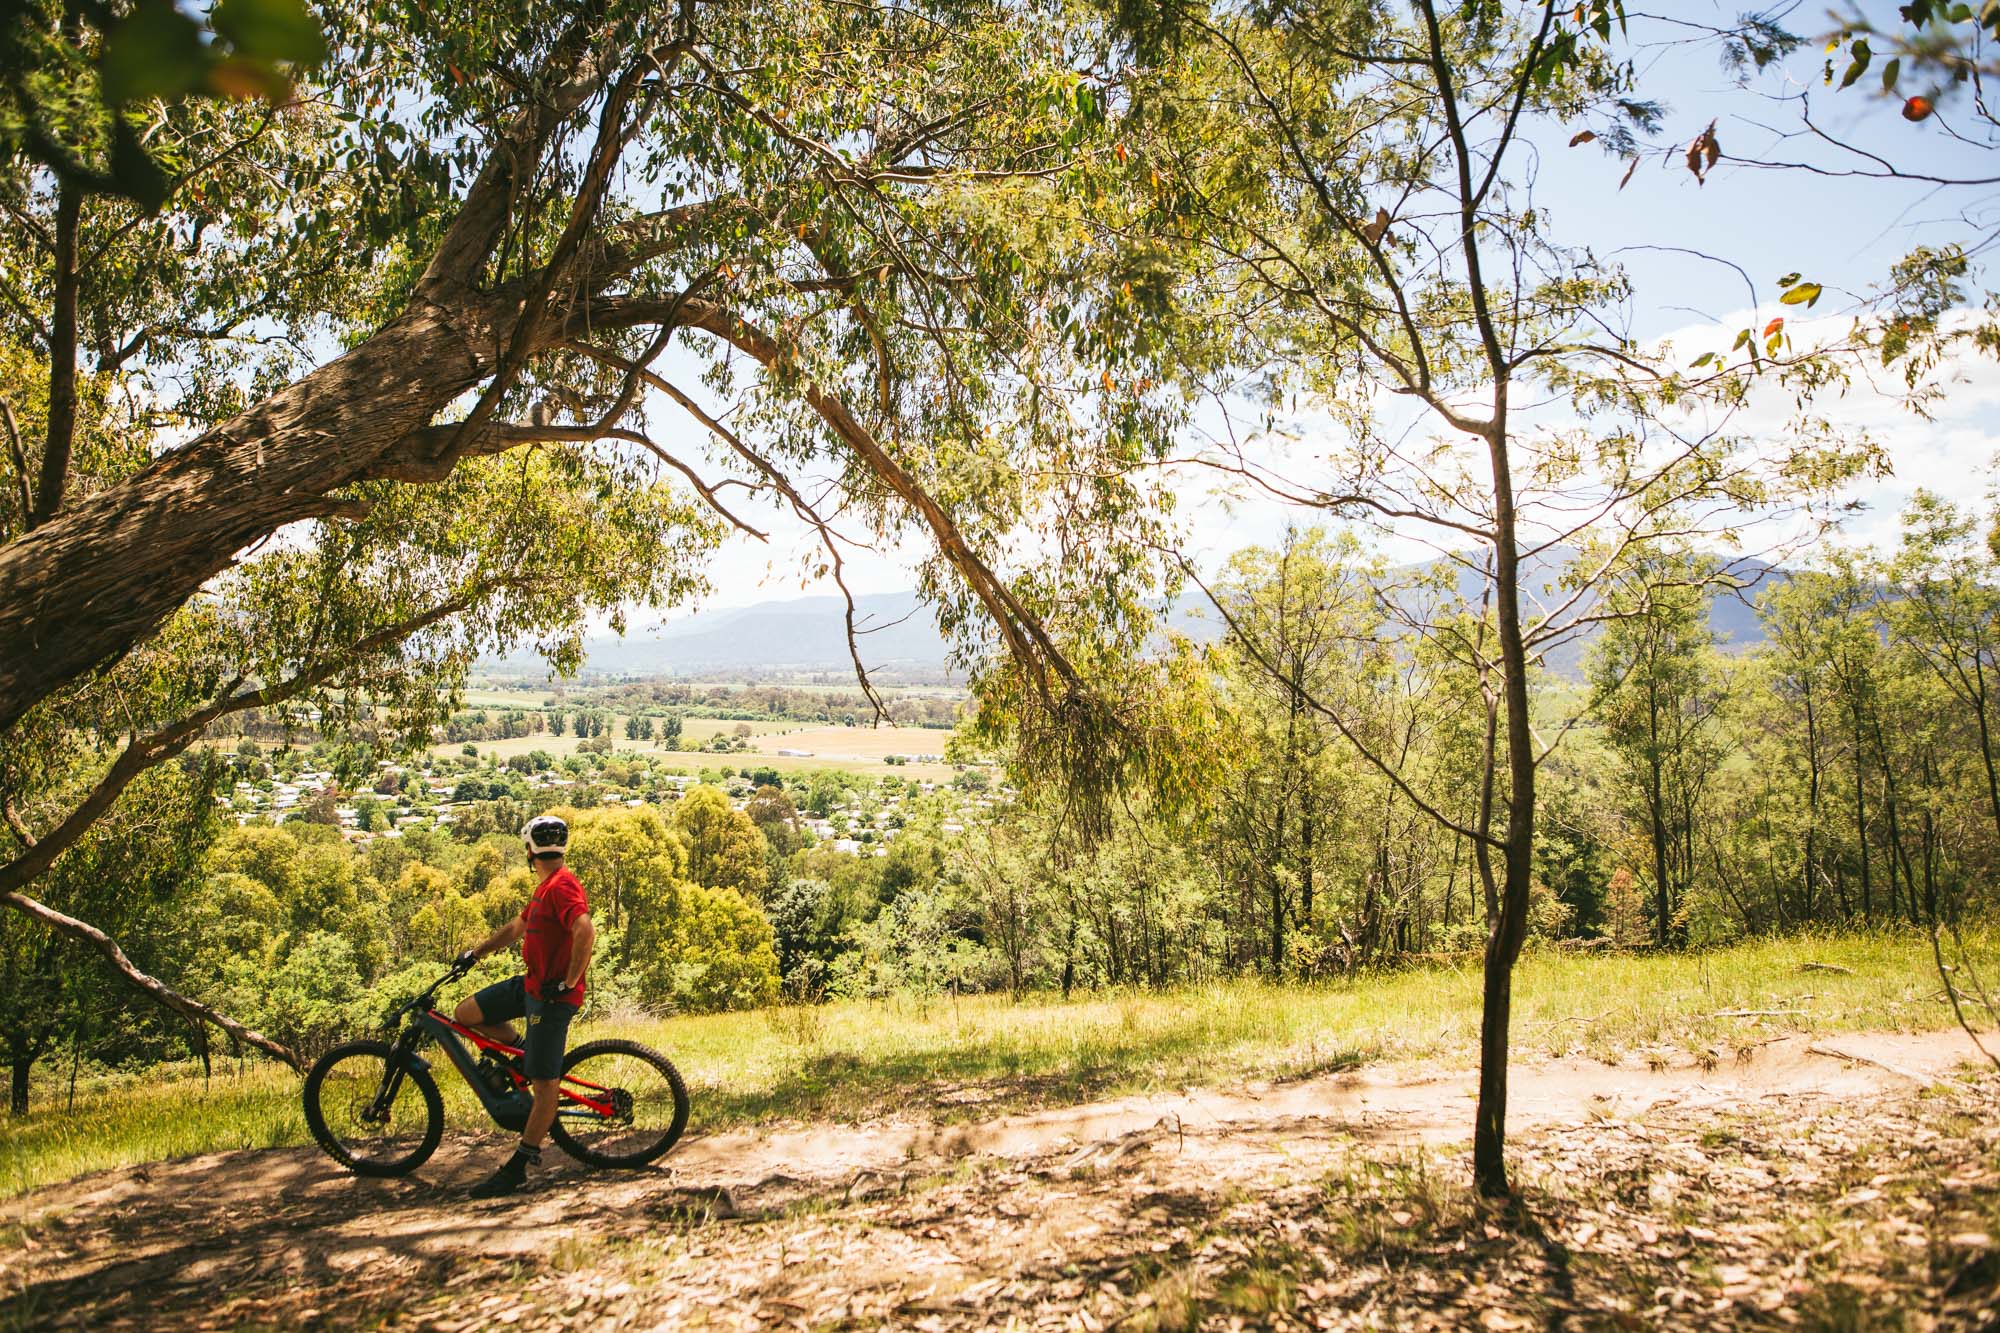 epic views from the mount beauty mountain bike trails